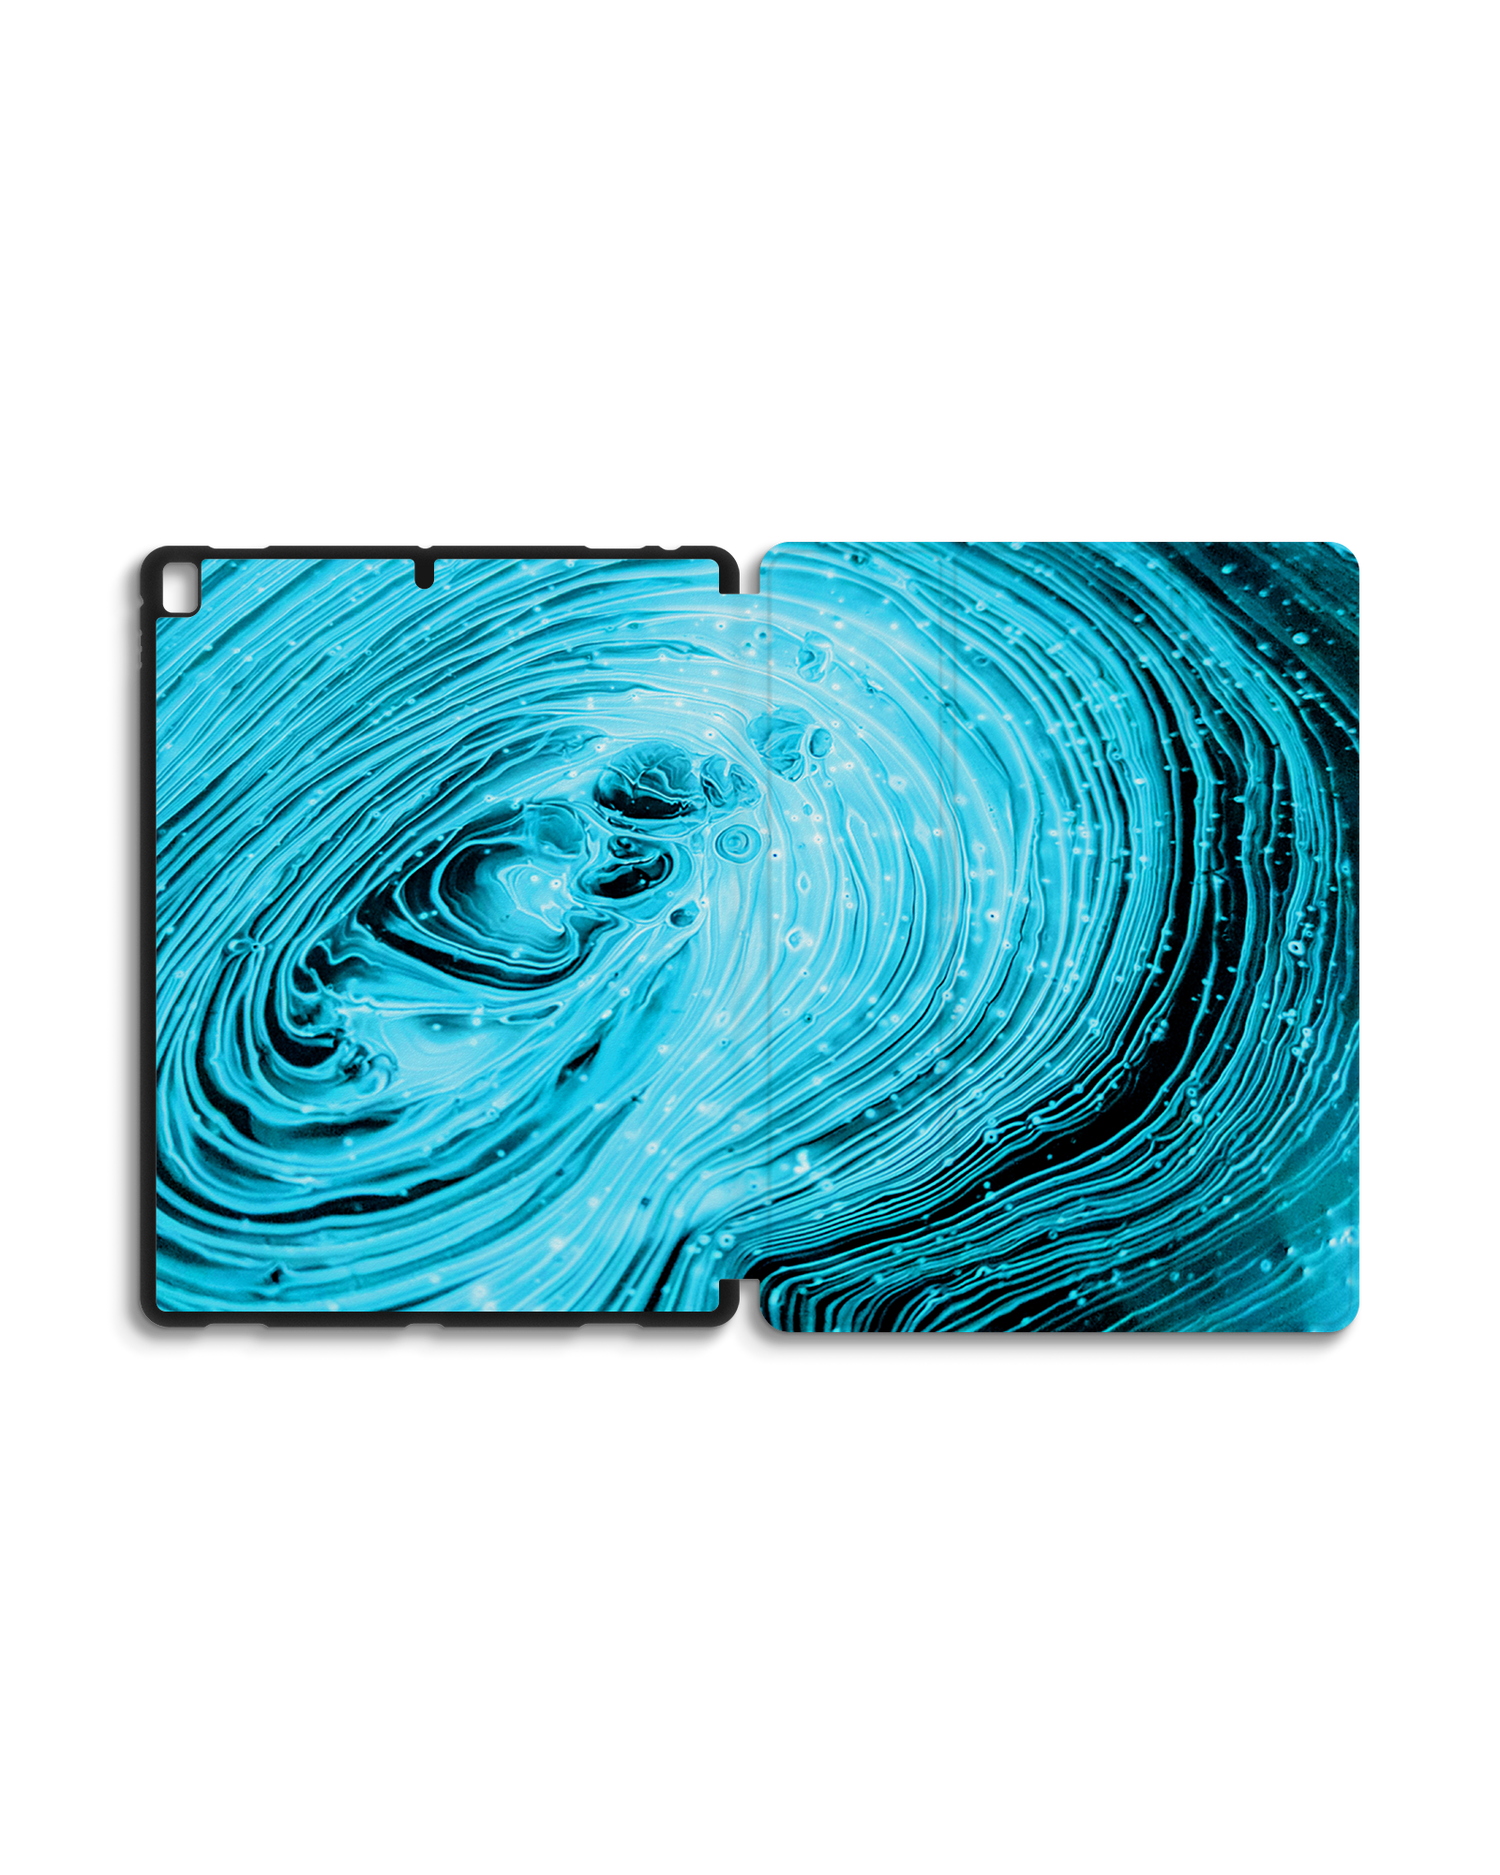 Turquoise Ripples iPad Case with Pencil Holder for Apple iPad Pro 2 12.9